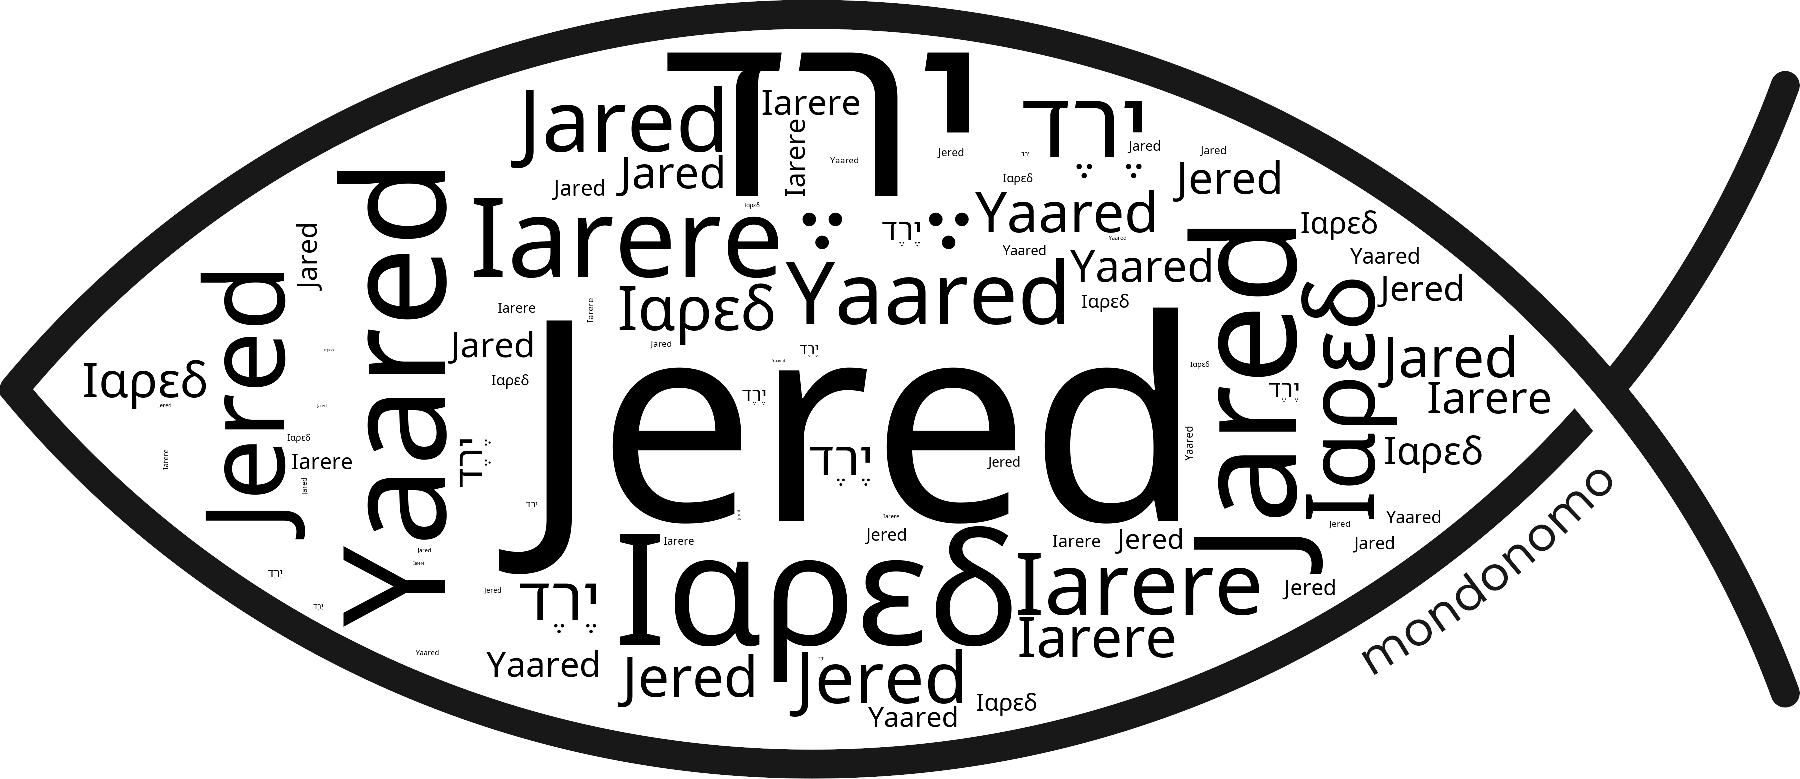 Name Jered in the world's Bibles